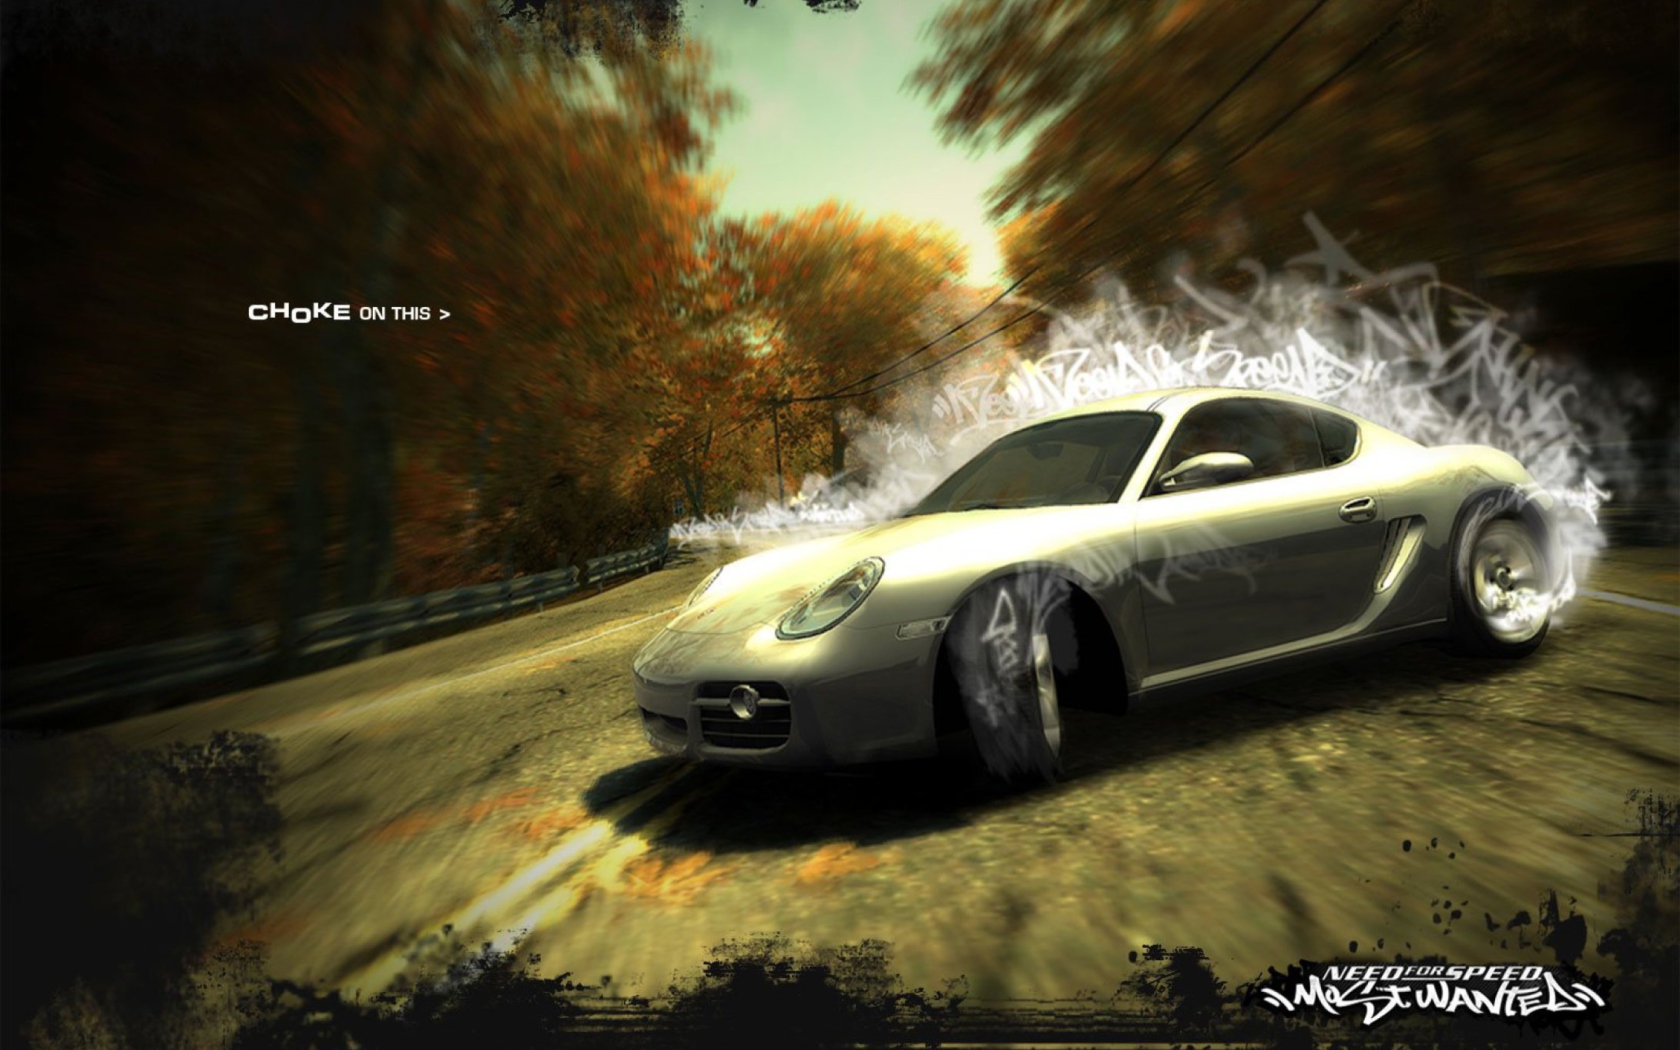 Need For Speed Most Wanted wallpaper 1680x1050